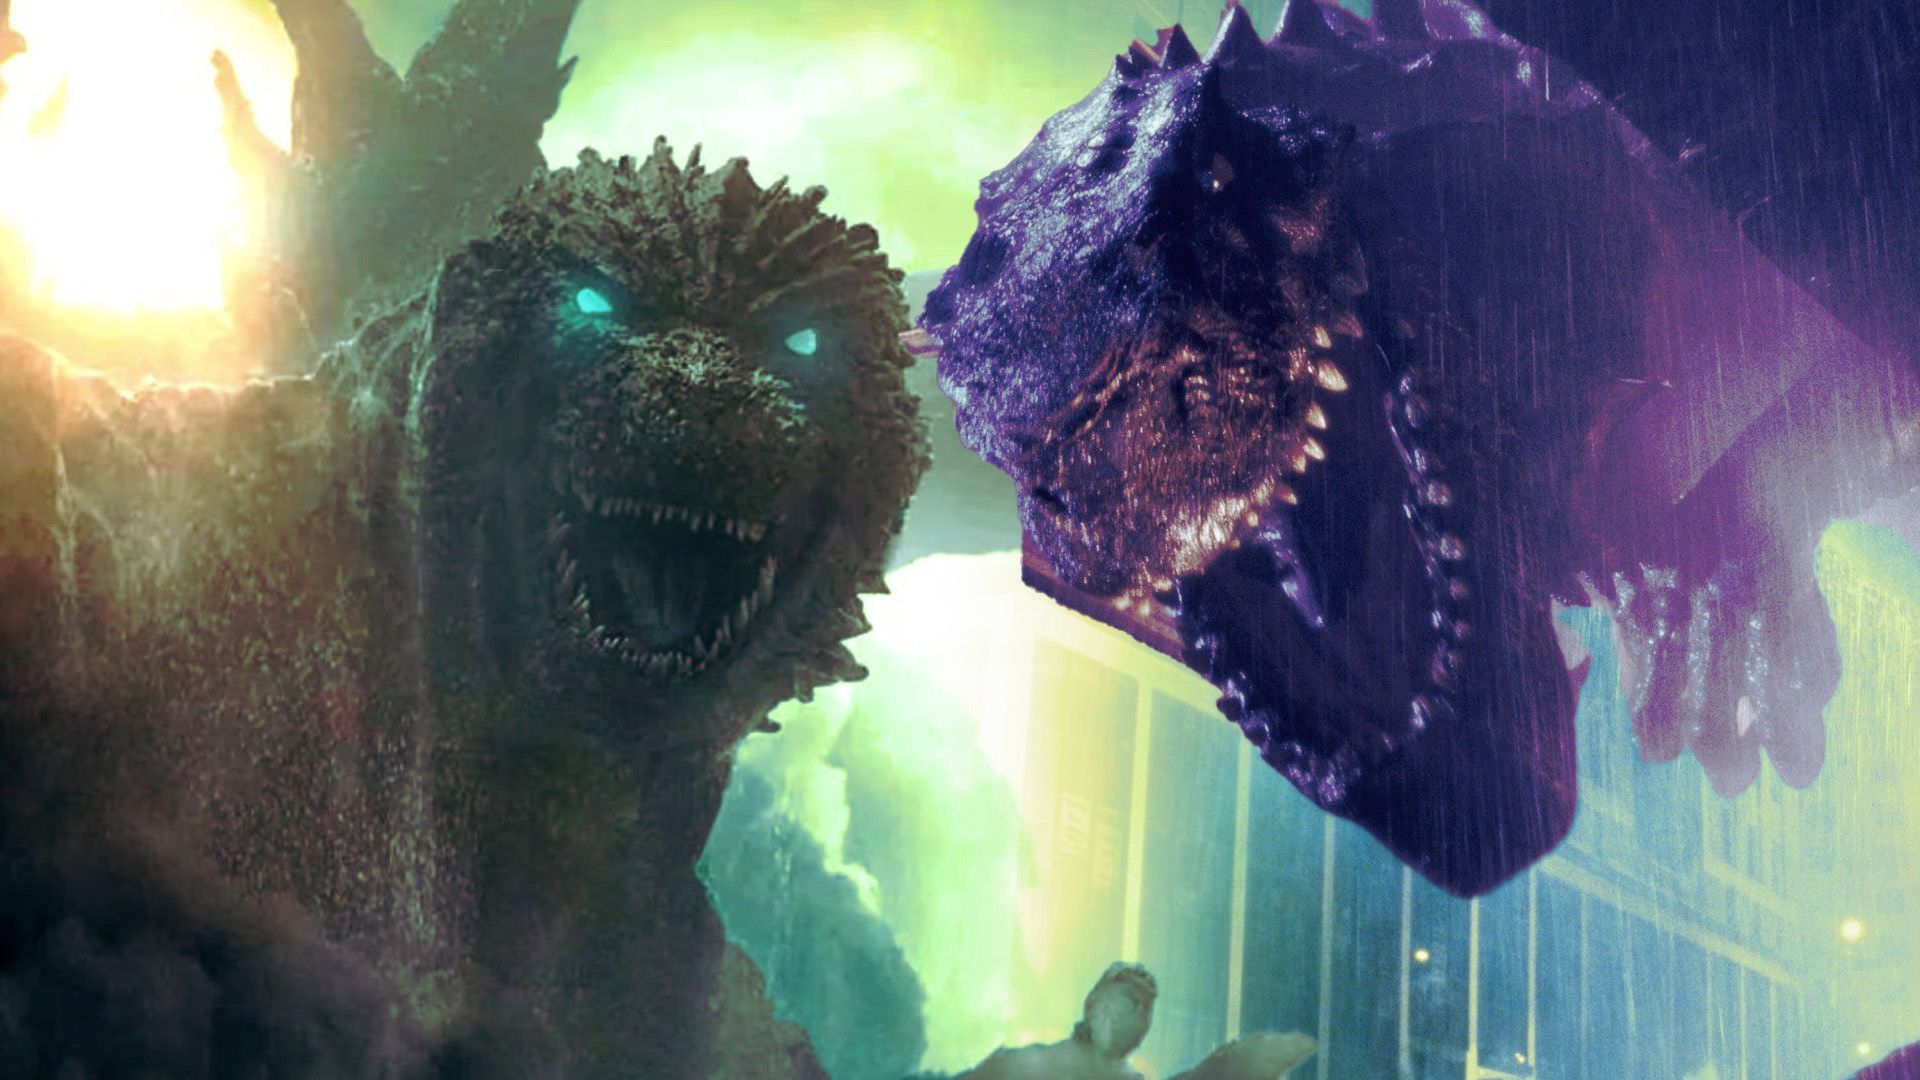 10 Biggest Differences Between American and Japanese Godzilla